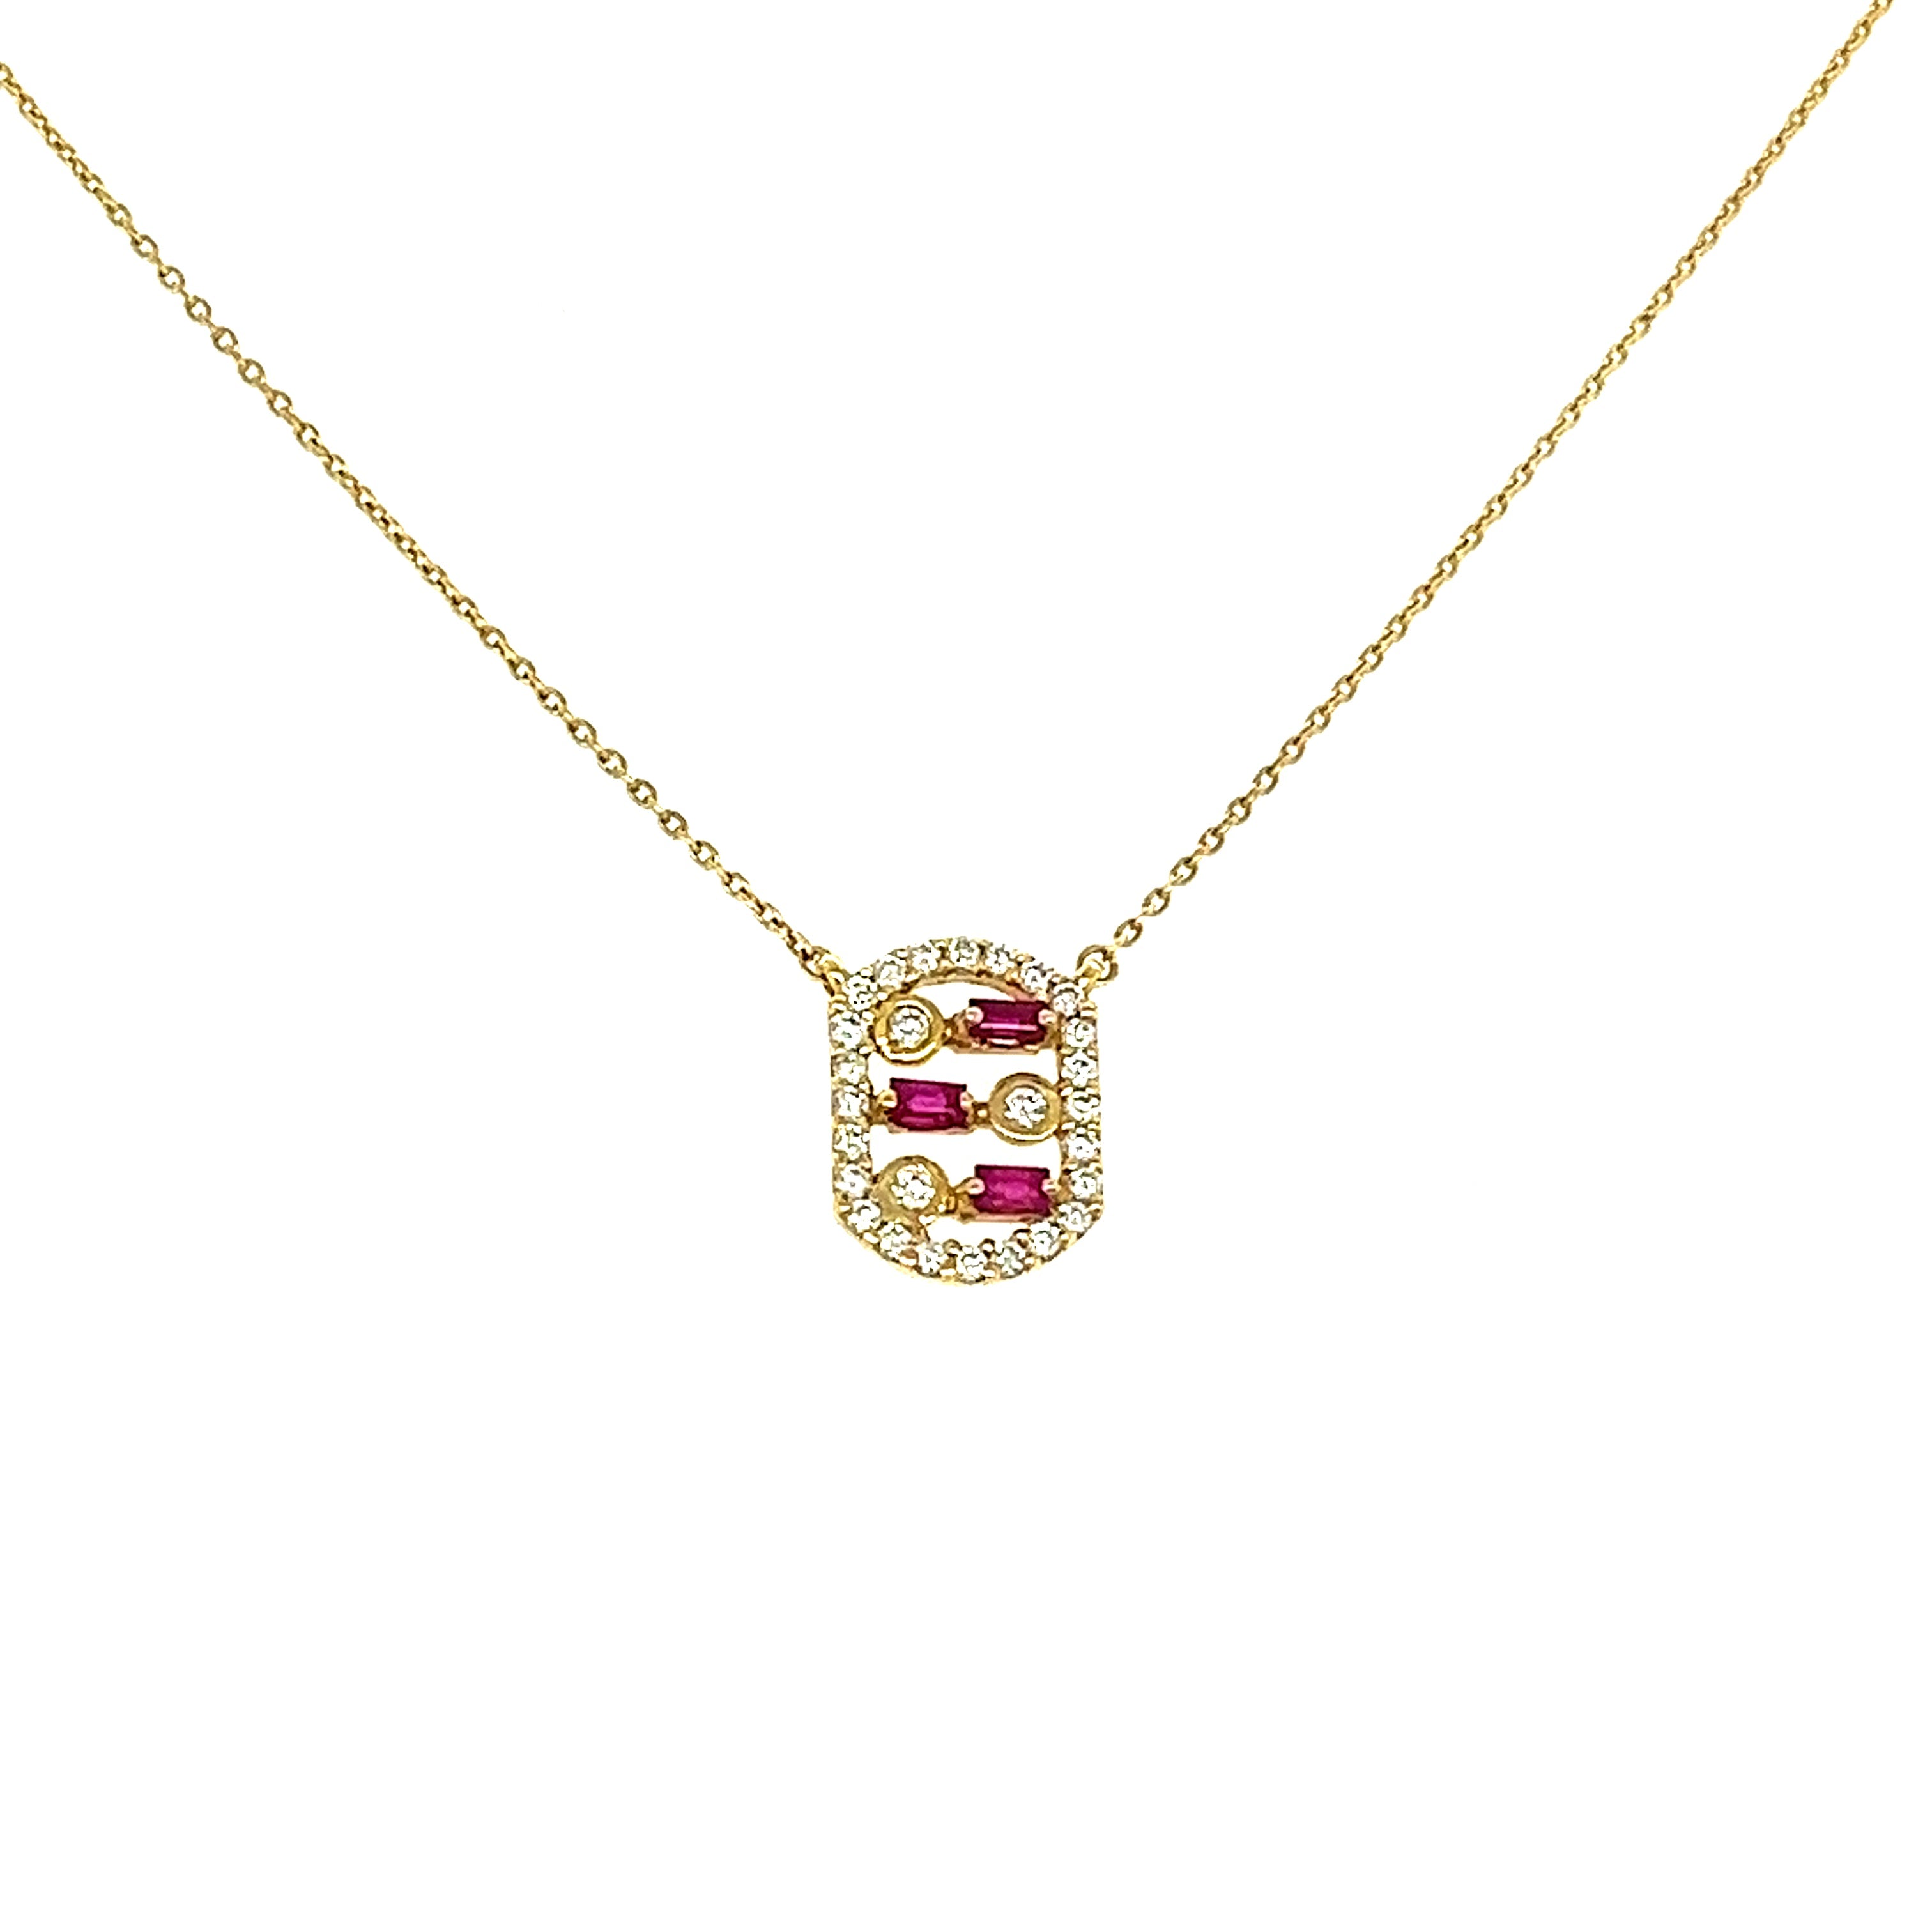 Ruby and Diamonds Necklace in 18K Yellow Gold - B-LINK164P